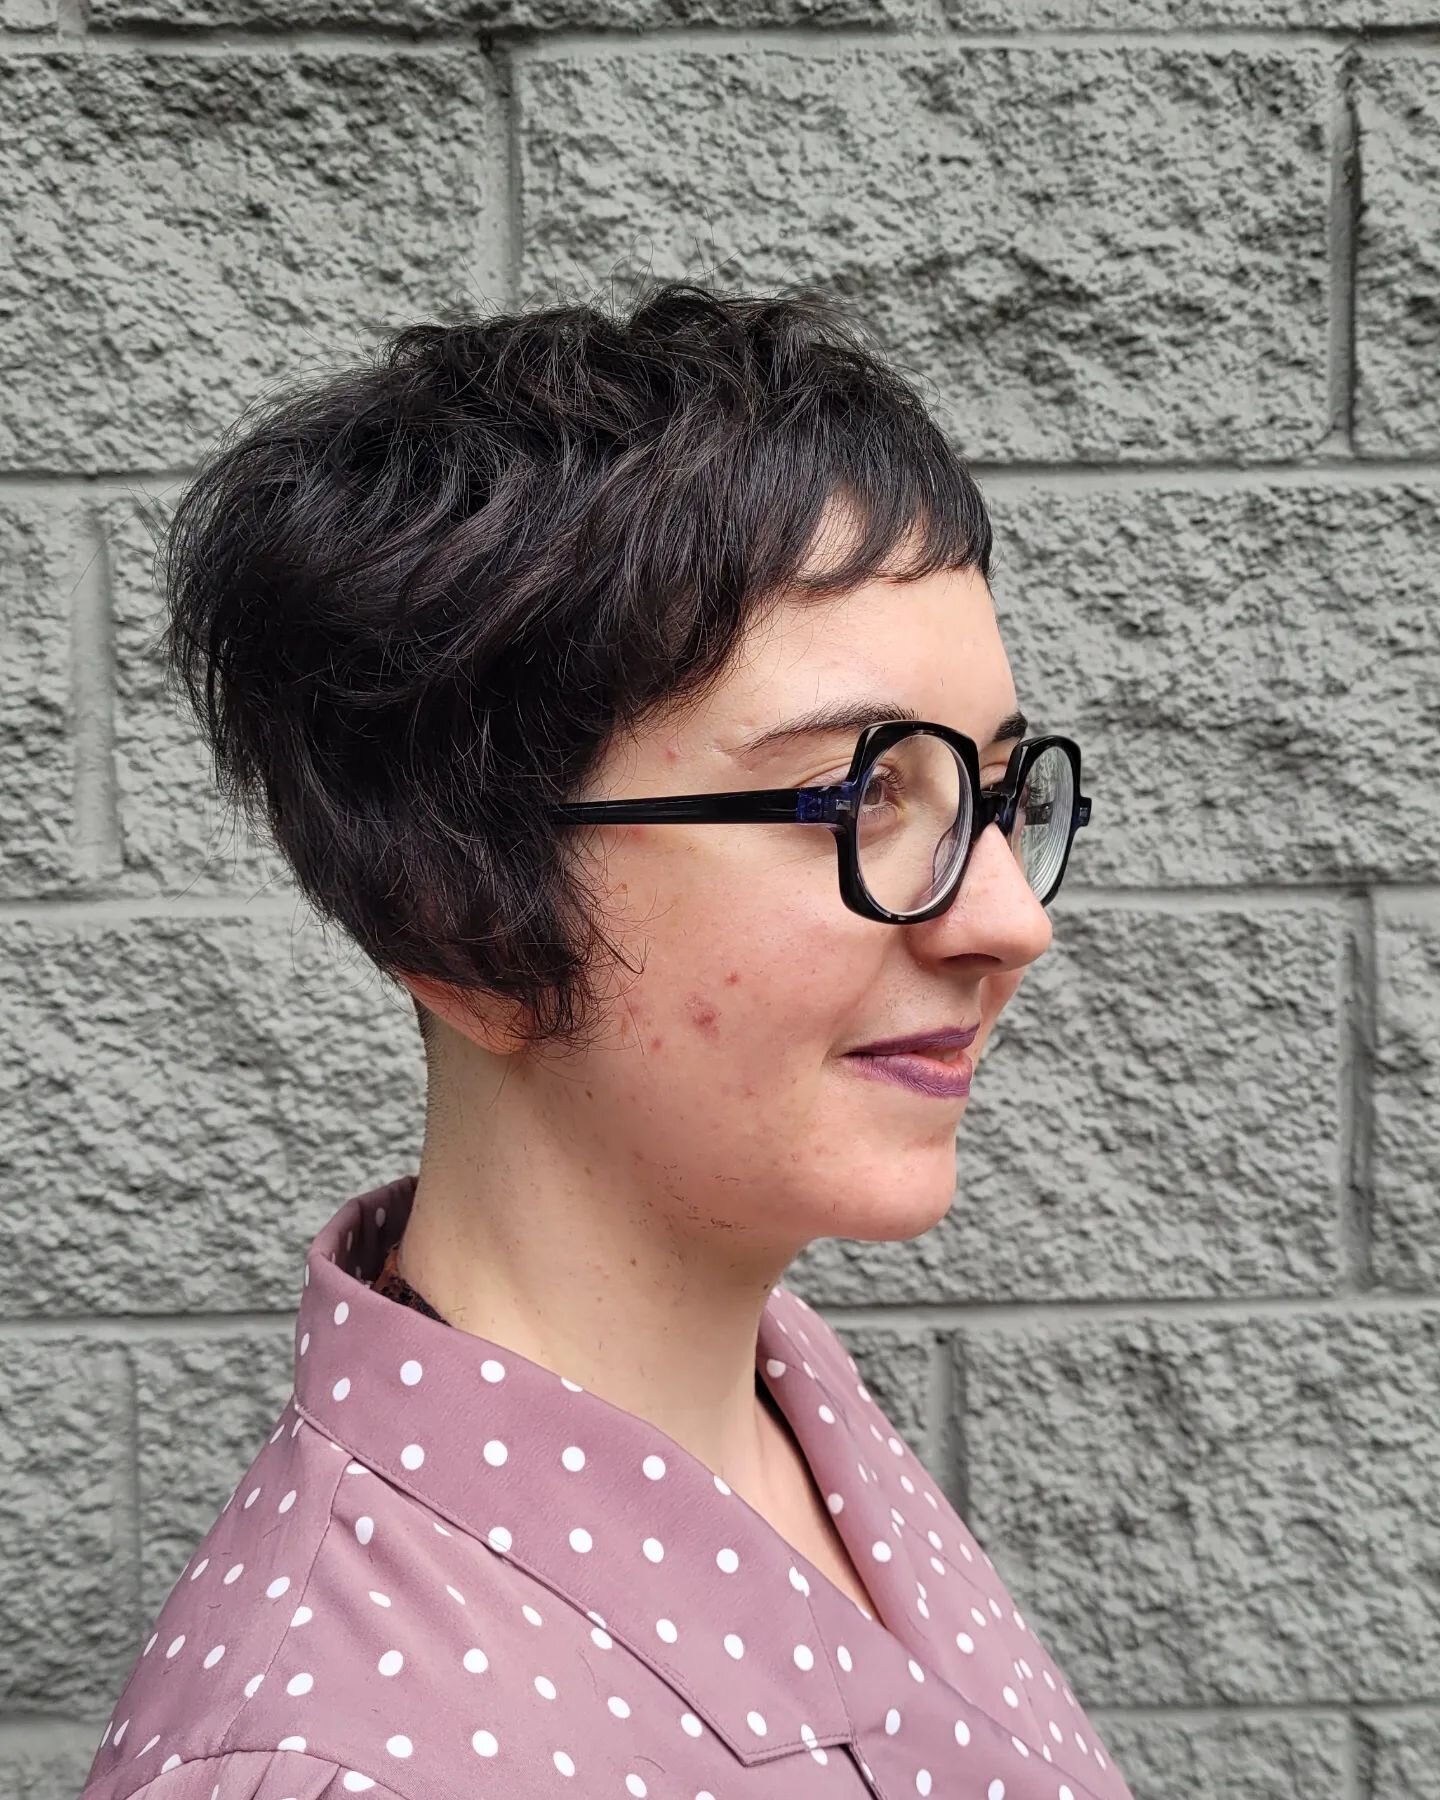 Fun haircut on Elma today 
Cut done by @ltacos 
#zinchair #behindthechair #sassoontrained #vancouverisawesome #vancouverstylist #vancouverfoodie #vancouverhair